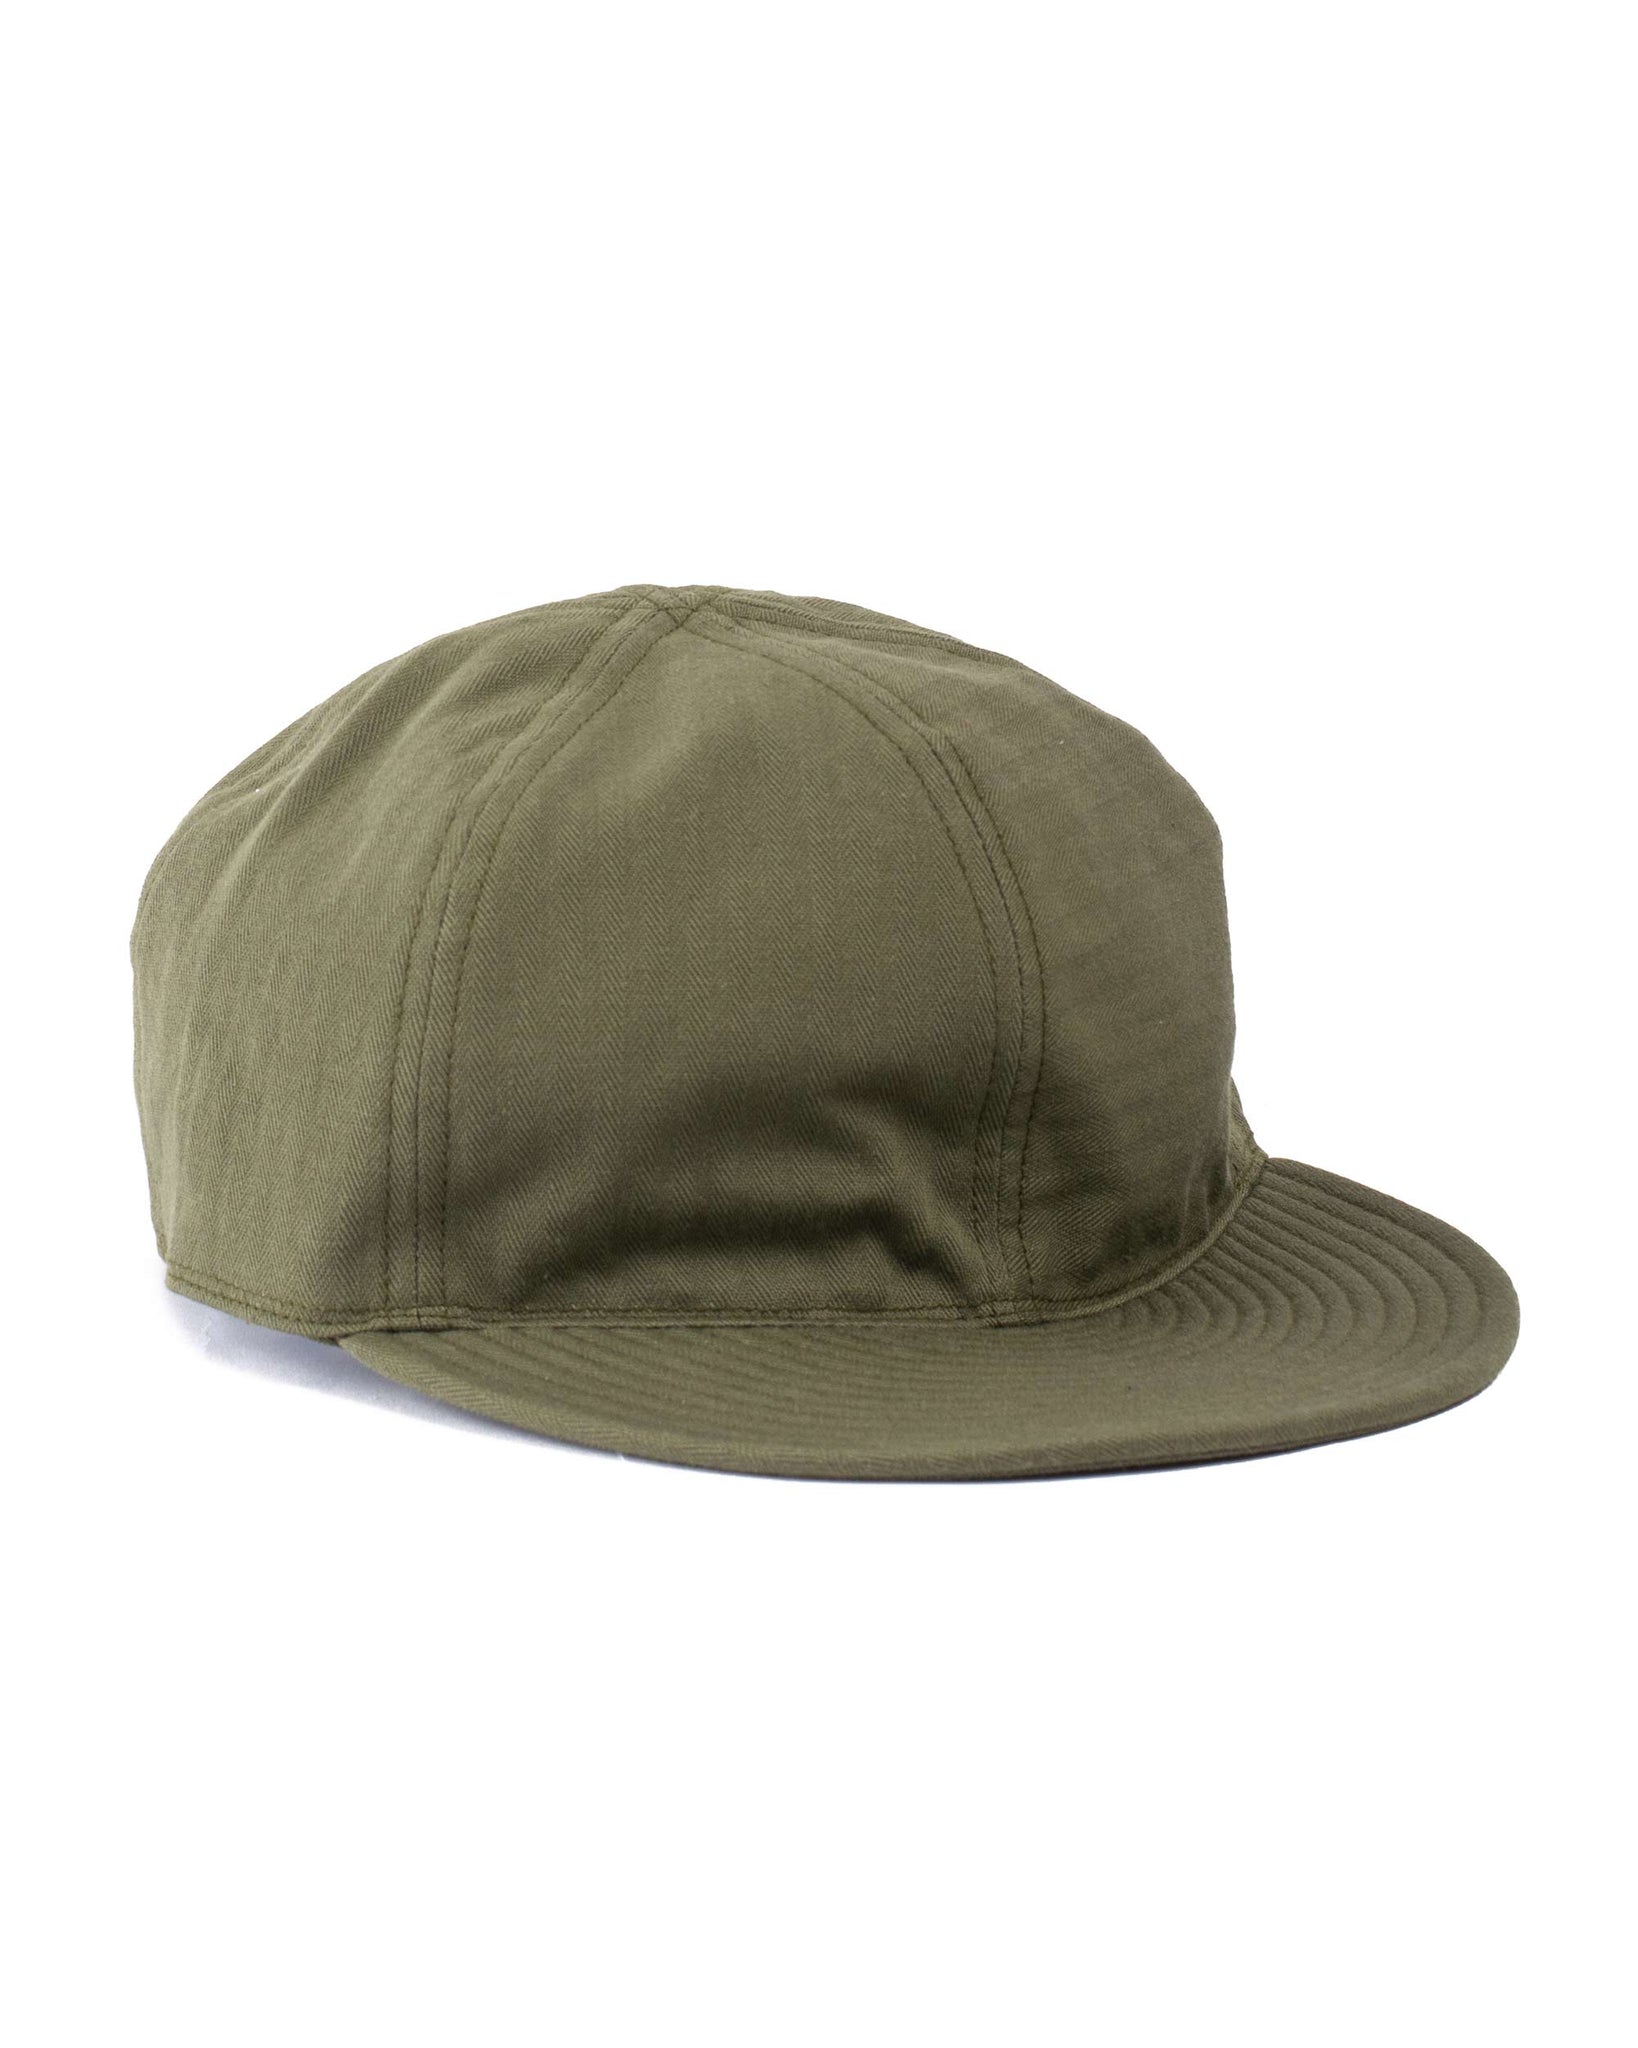 The Real McCoy's MA22001 Type A-3 Cap / Decal Olive